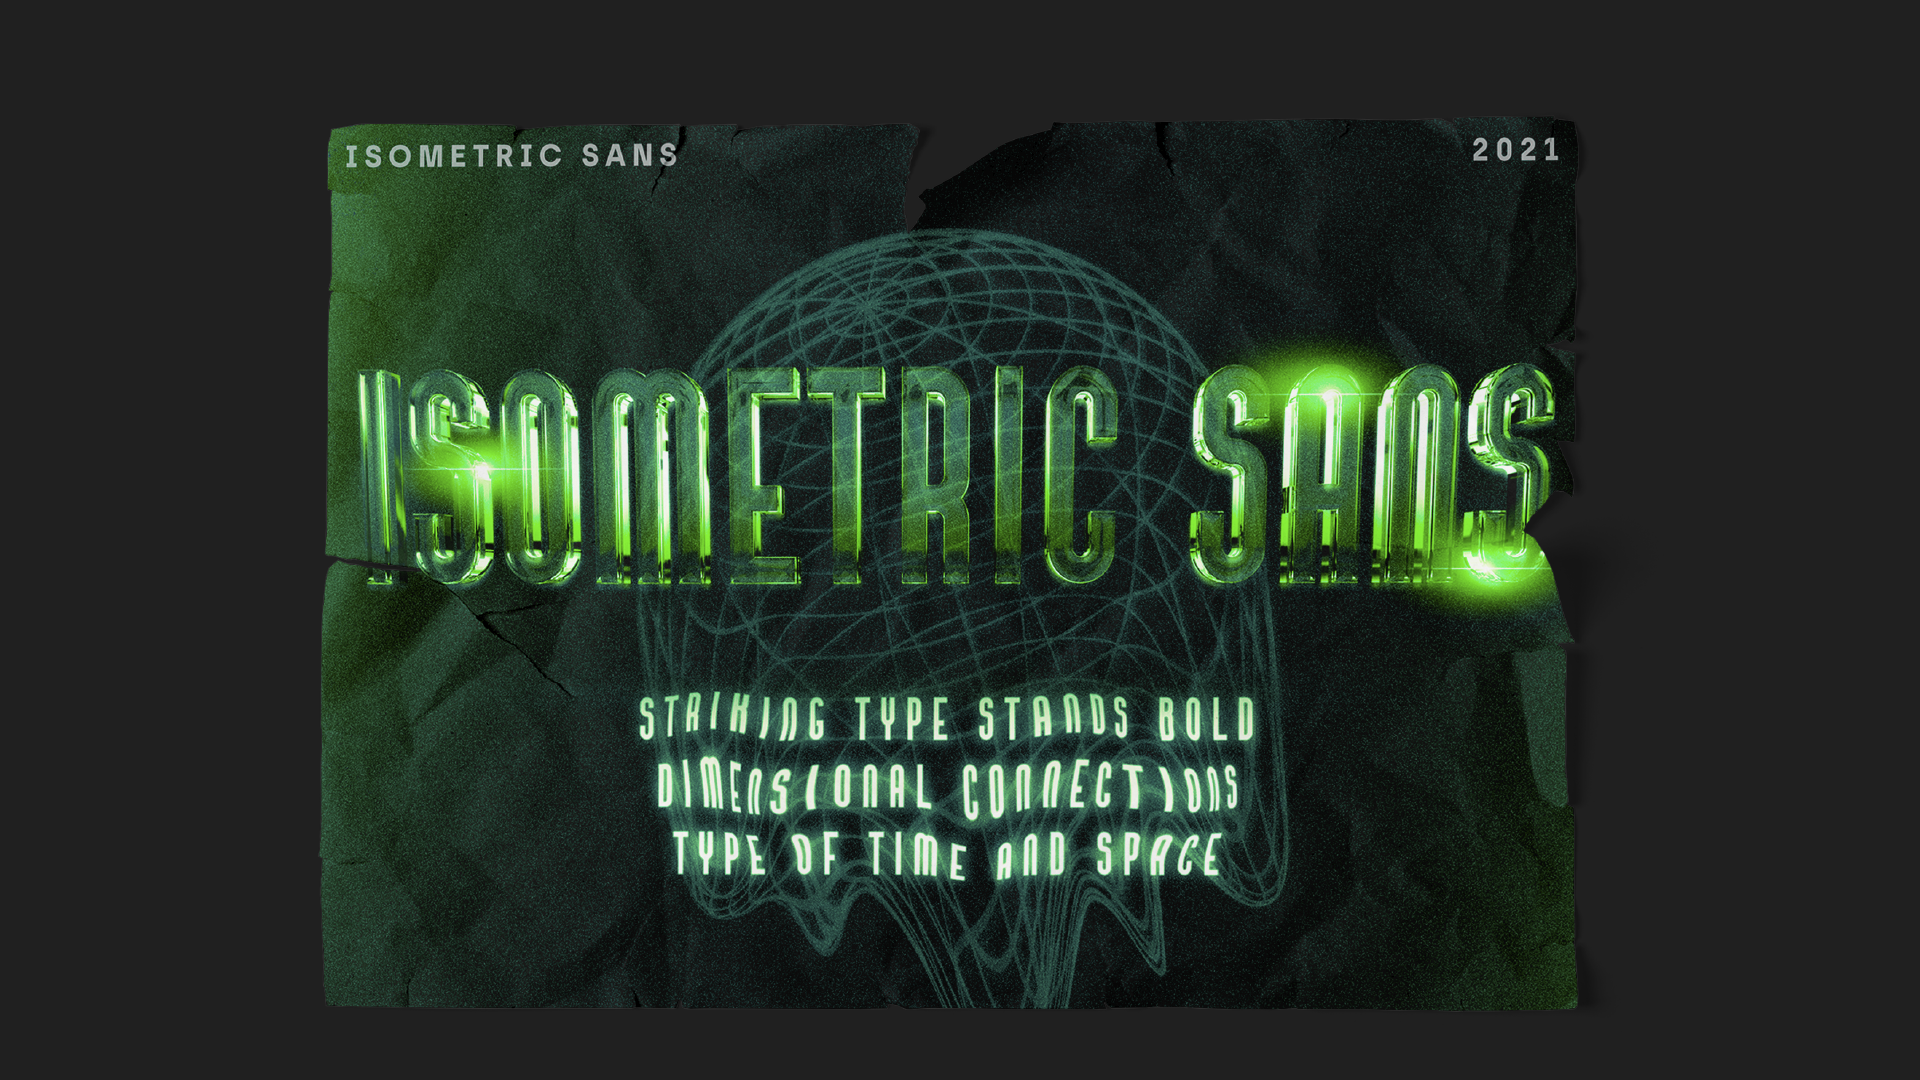 featured image five:Isometric Sans